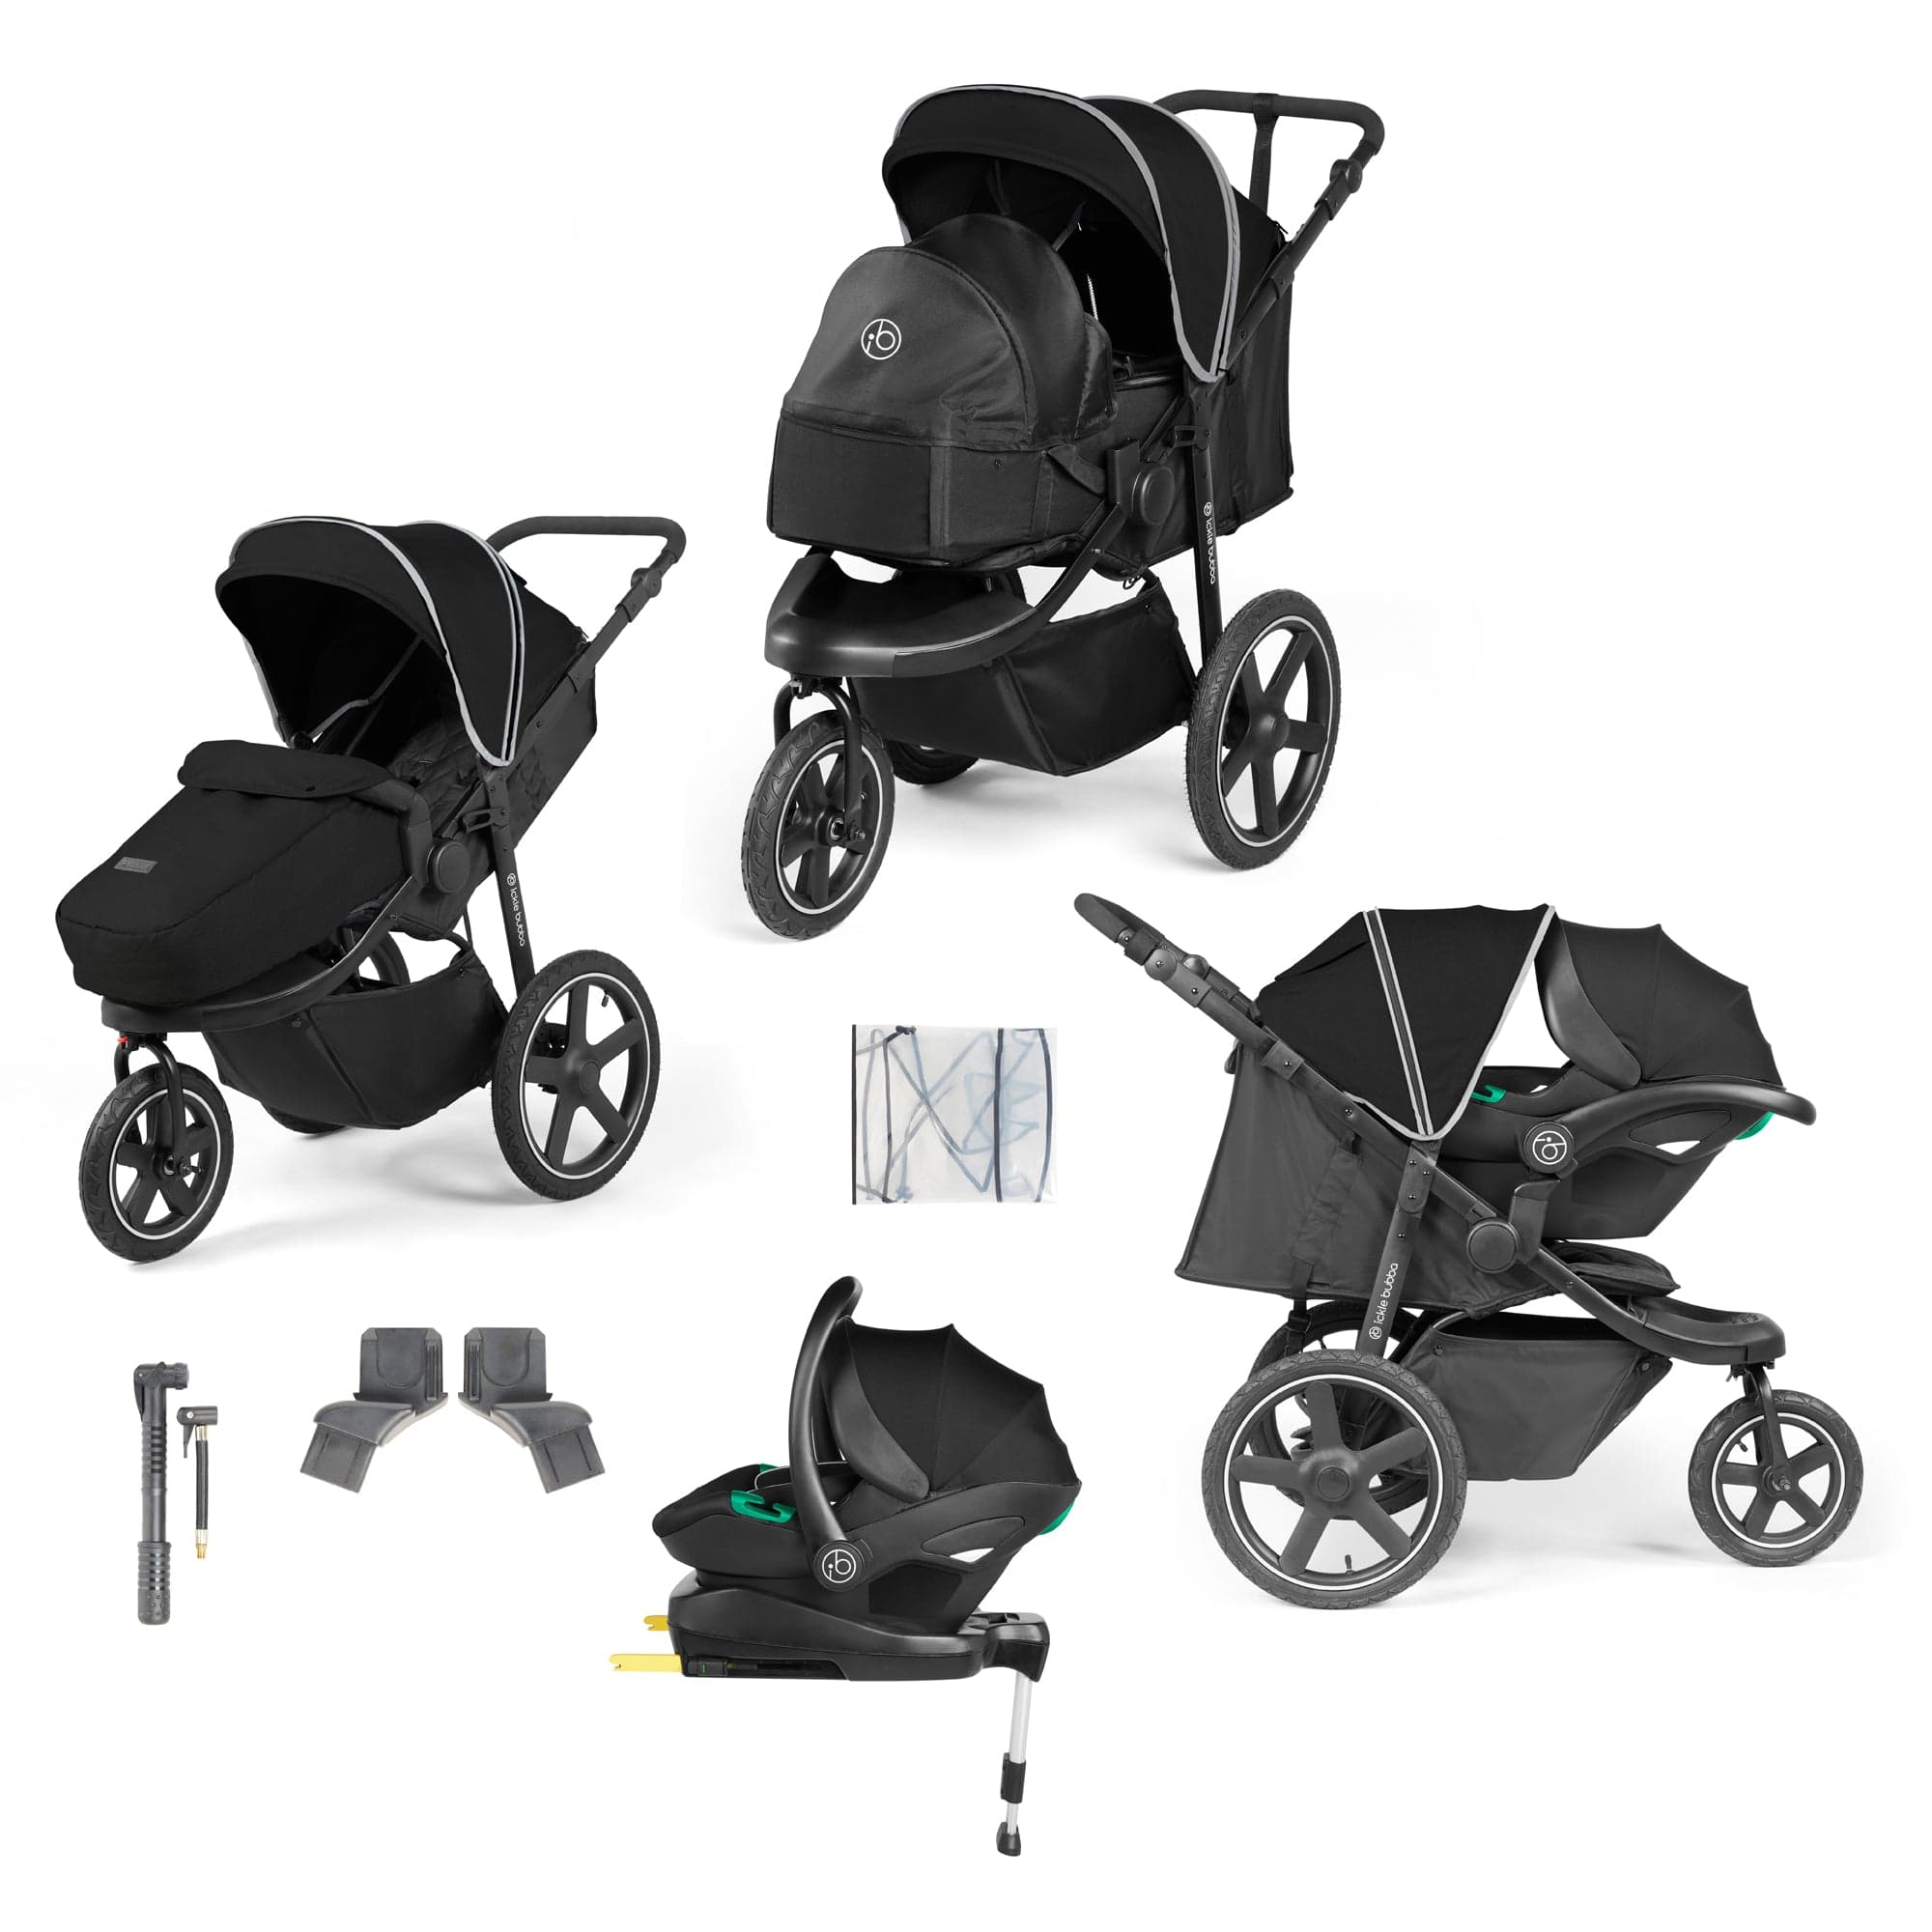 Ickle Bubba 3 wheel pushchairs Ickle Bubba Venus Prime Jogger Stroller I-Size Travel System - Black/Black with Base 13-004-600-001